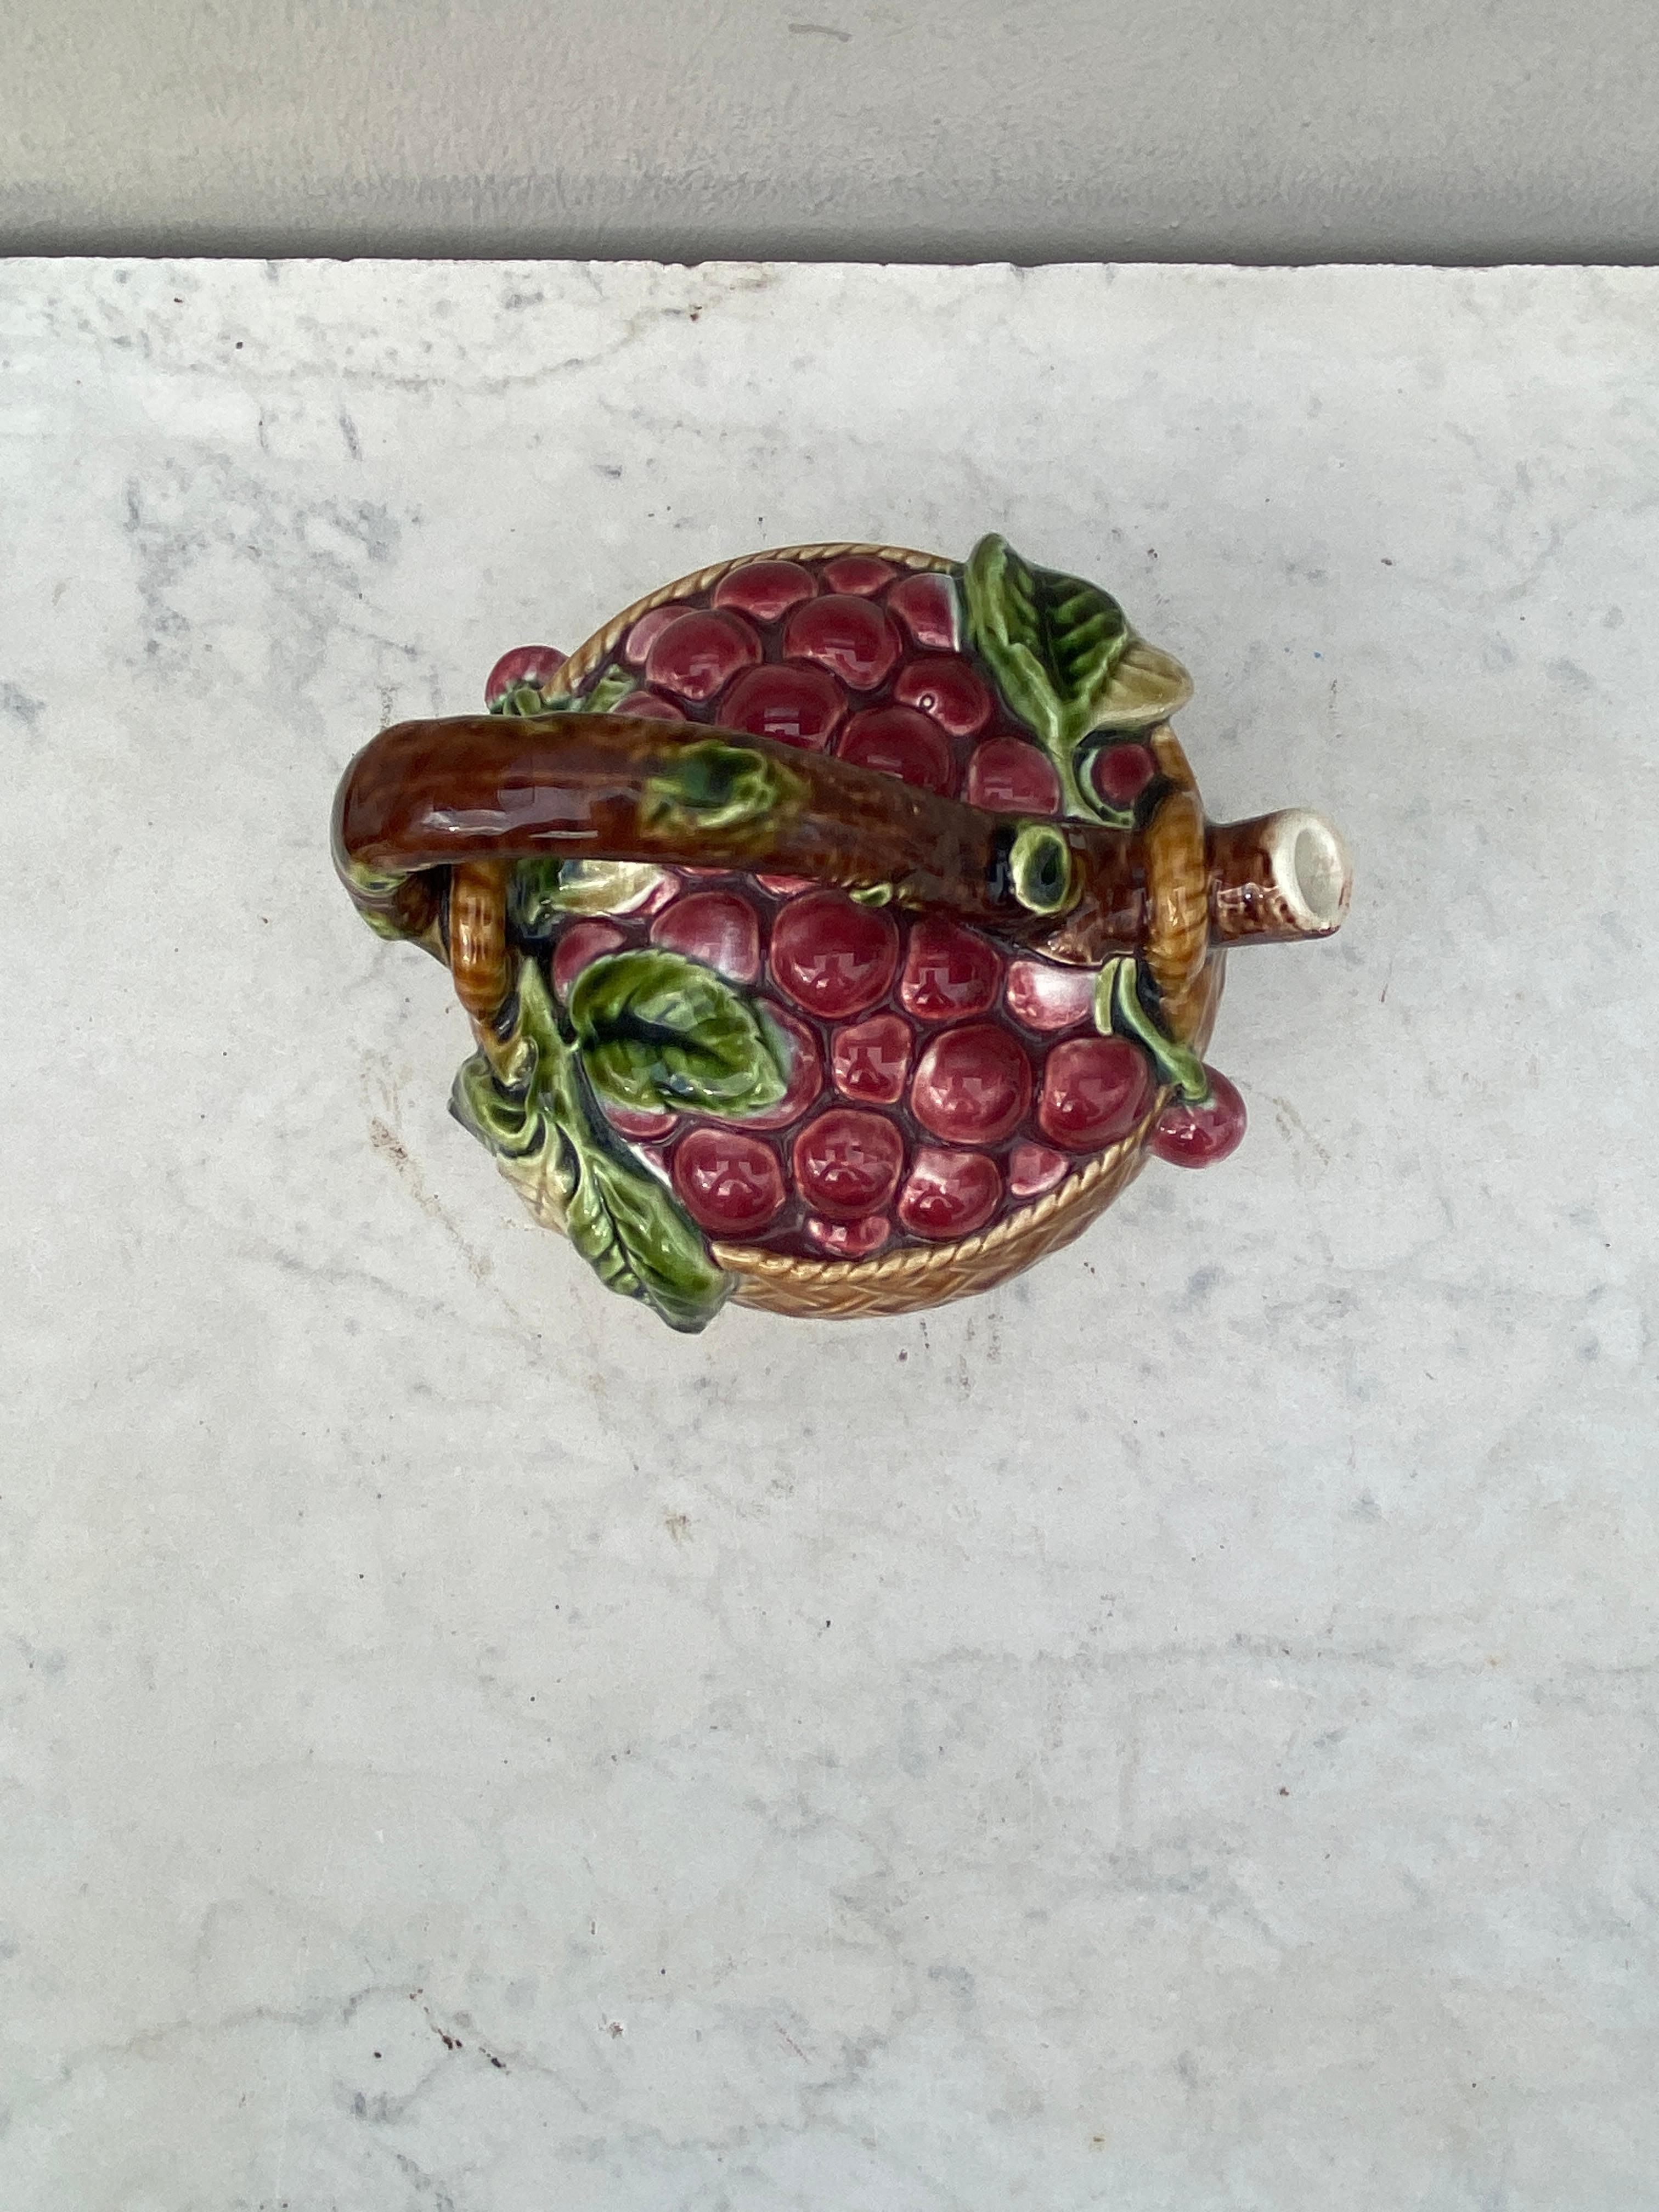 Majolica Sarreguemines Cherries Pitcher, circa 1900.
Made for the liquors company Cuisenier , Cusenier is a French spirits brand, whose distillery house was founded in Ornans (Doubs) by Eugène Cusenier under the name of E. Cusenier, Fils aîné et Cie